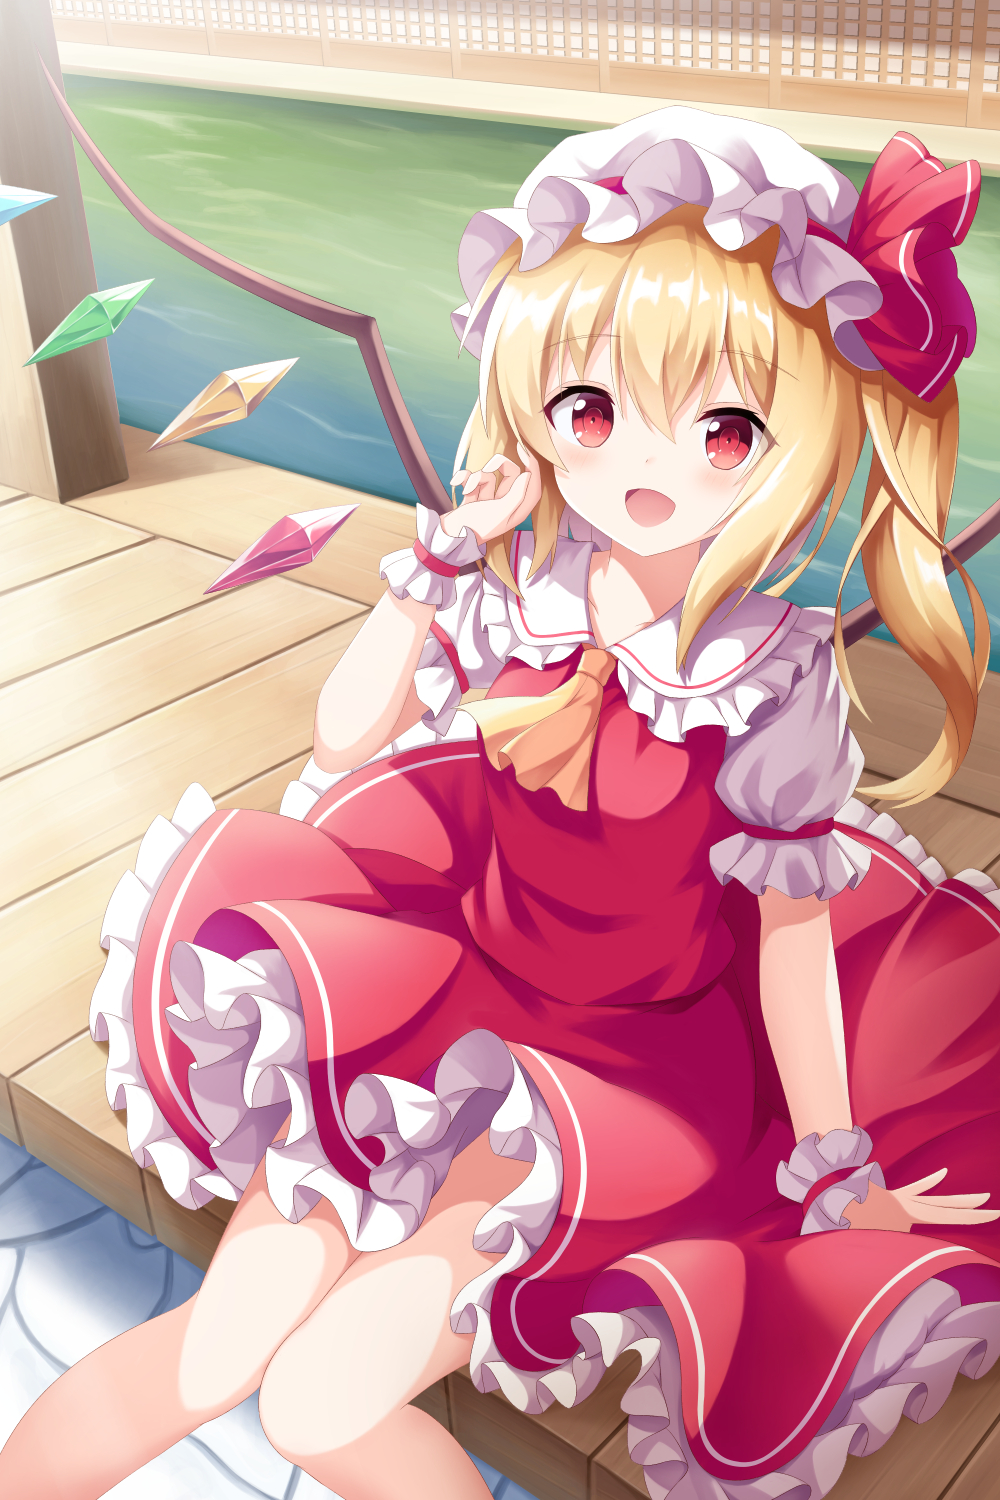 1girl bangs blonde_hair blush collar crystal dress eyebrows_visible_through_hair eyes_visible_through_hair flandre_scarlet hair_between_eyes hand_up hat hat_ribbon highres jewelry light lolita_fashion looking_at_viewer mob_cap multicolored multicolored_wings one_side_up open_mouth puffy_short_sleeves puffy_sleeves red_dress red_eyes red_ribbon ribbon road shadow short_hair short_sleeves sitting smile solo sunlight touhou water white_headwear wings wrist_cuffs yasuharasora yellow_neckwear